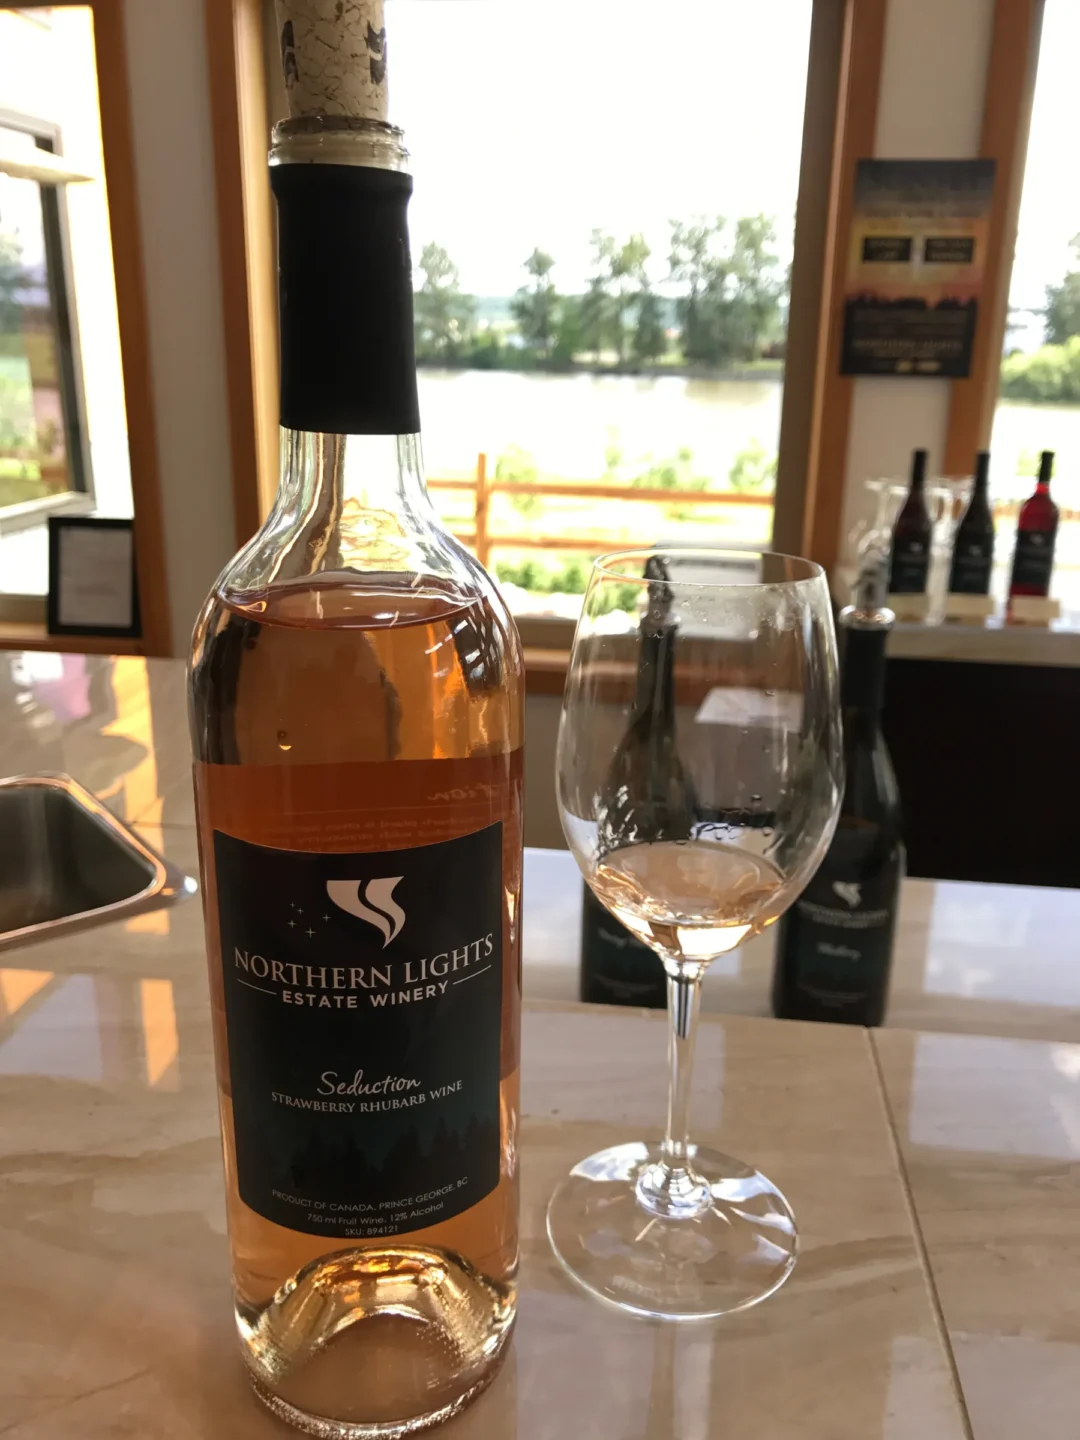 A bottle of Northern Lights Estate Winery Seduction Wine 